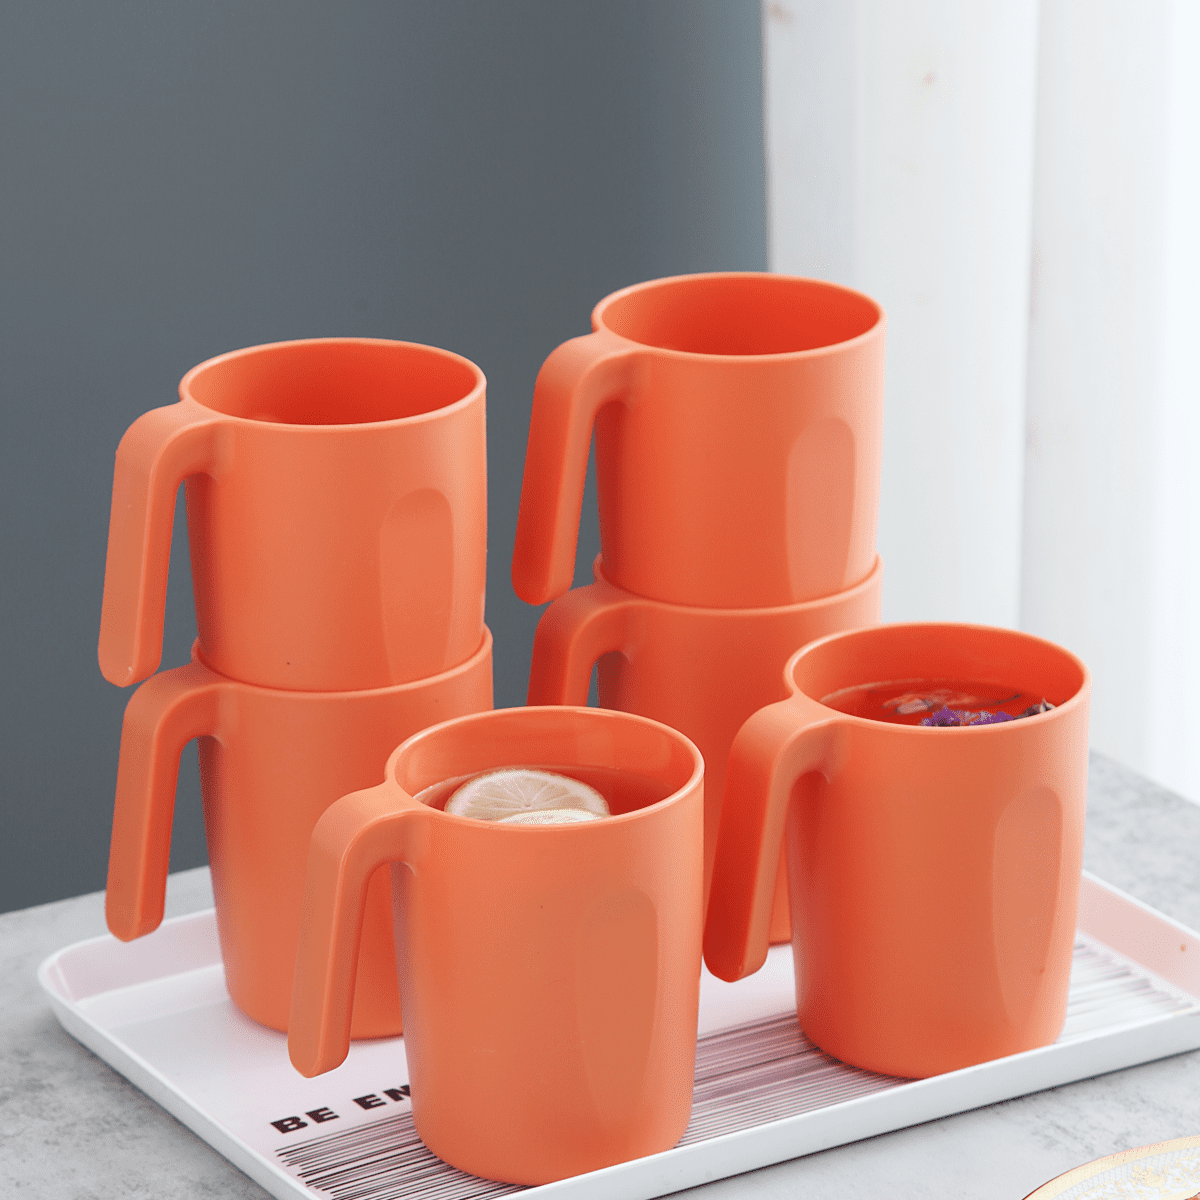 Large Carafe Size Reusable K Cup Capsule, Color: Orange - JCPenney